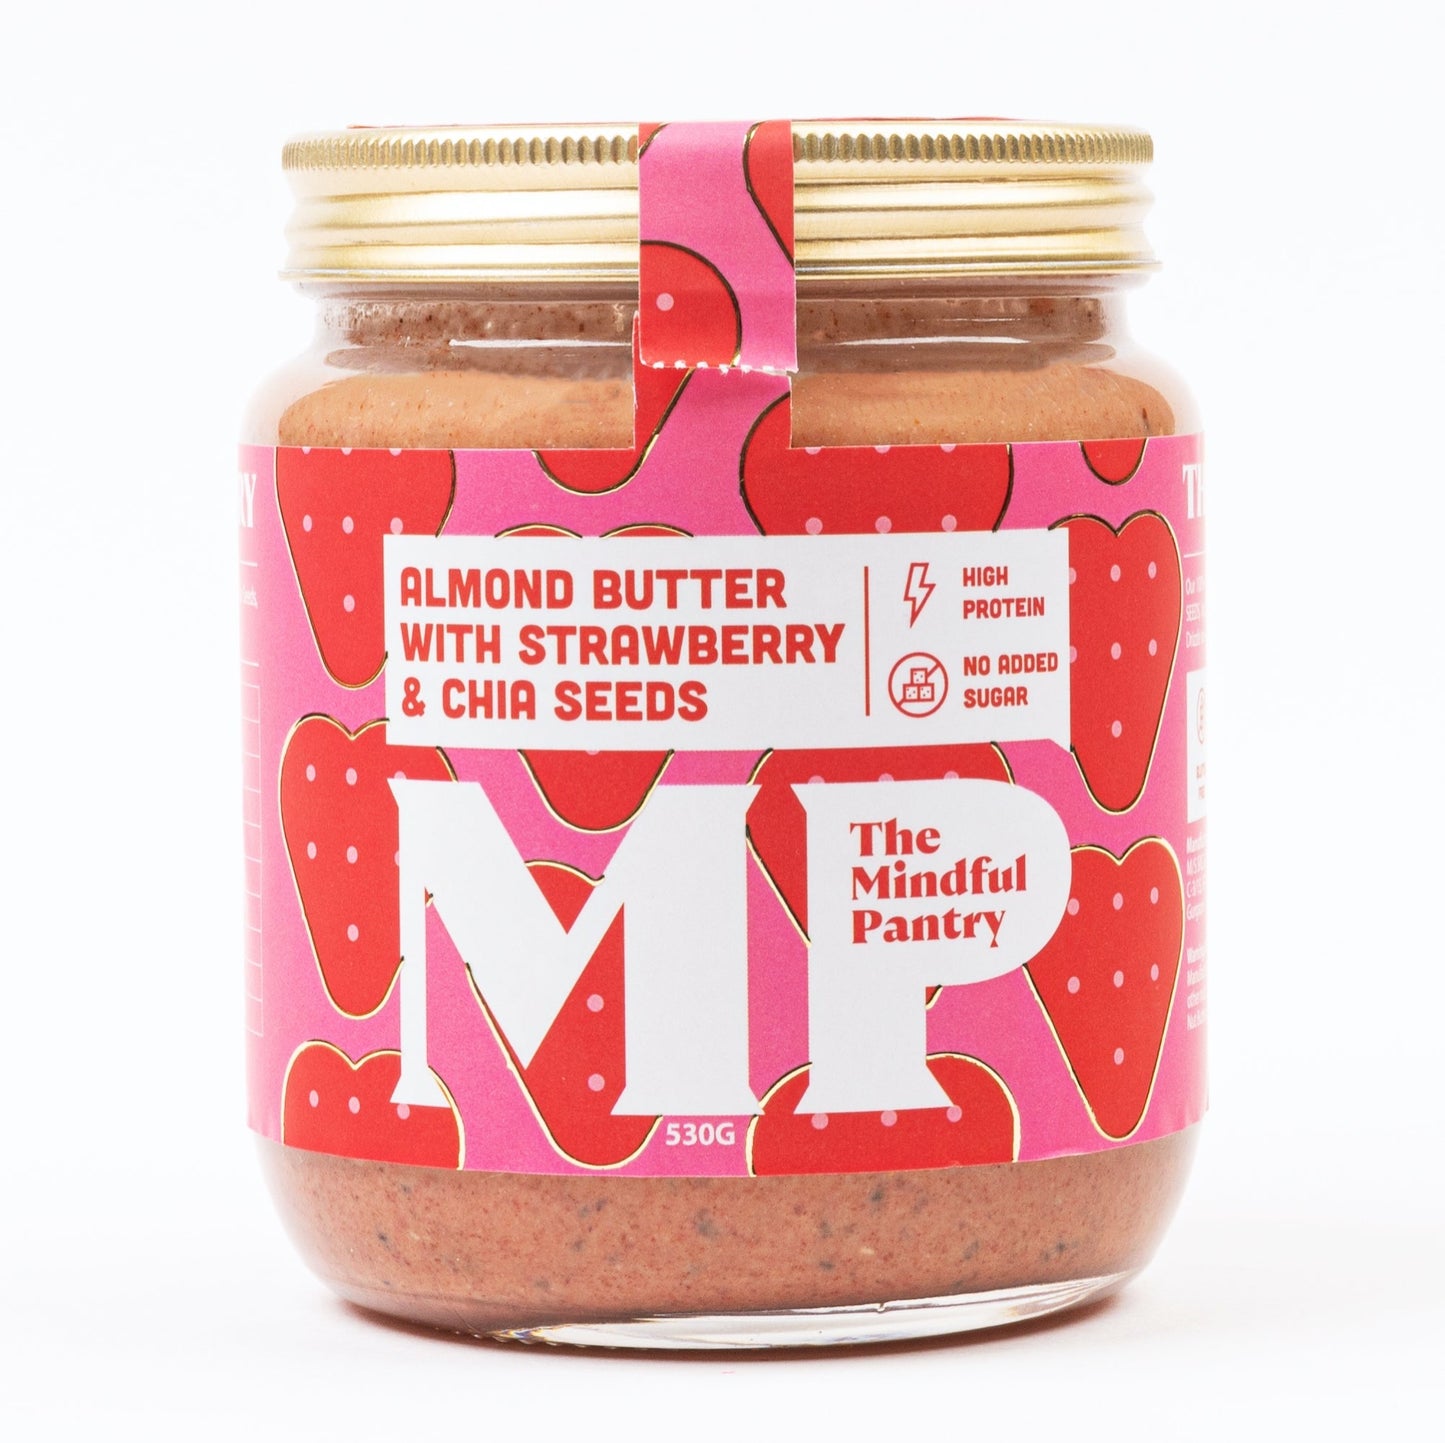 Almond Butter With Strawberry and Chia Seeds